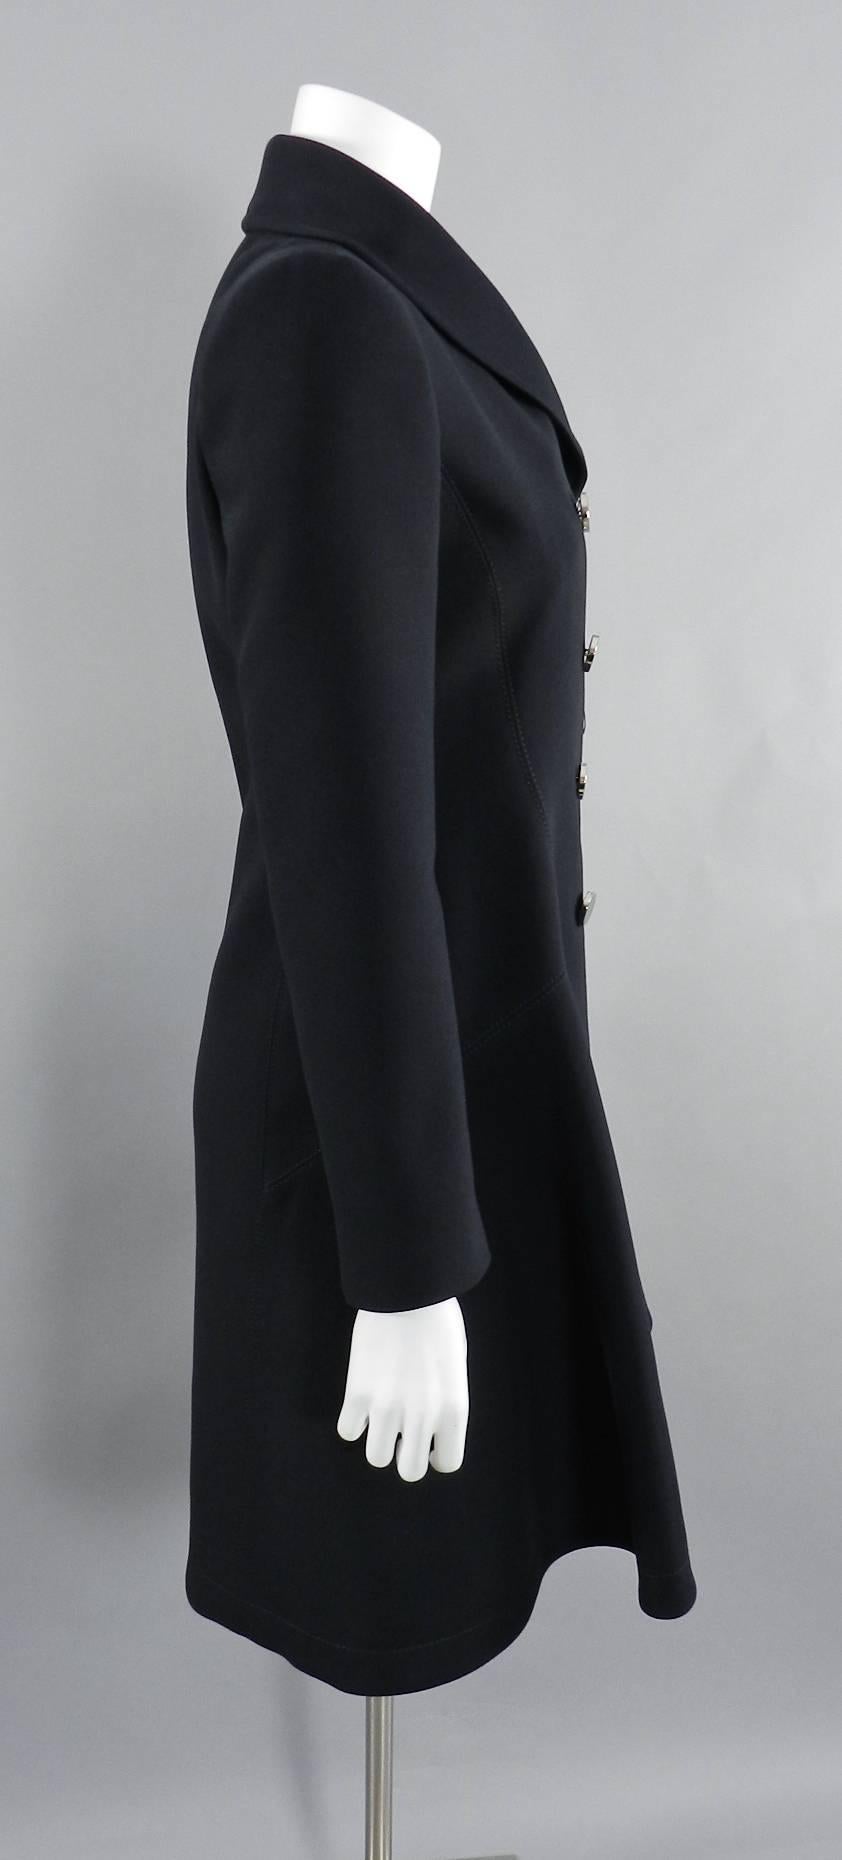 Women's Gucci pre-fall 2014 Black Dress coat with Silver Buttons